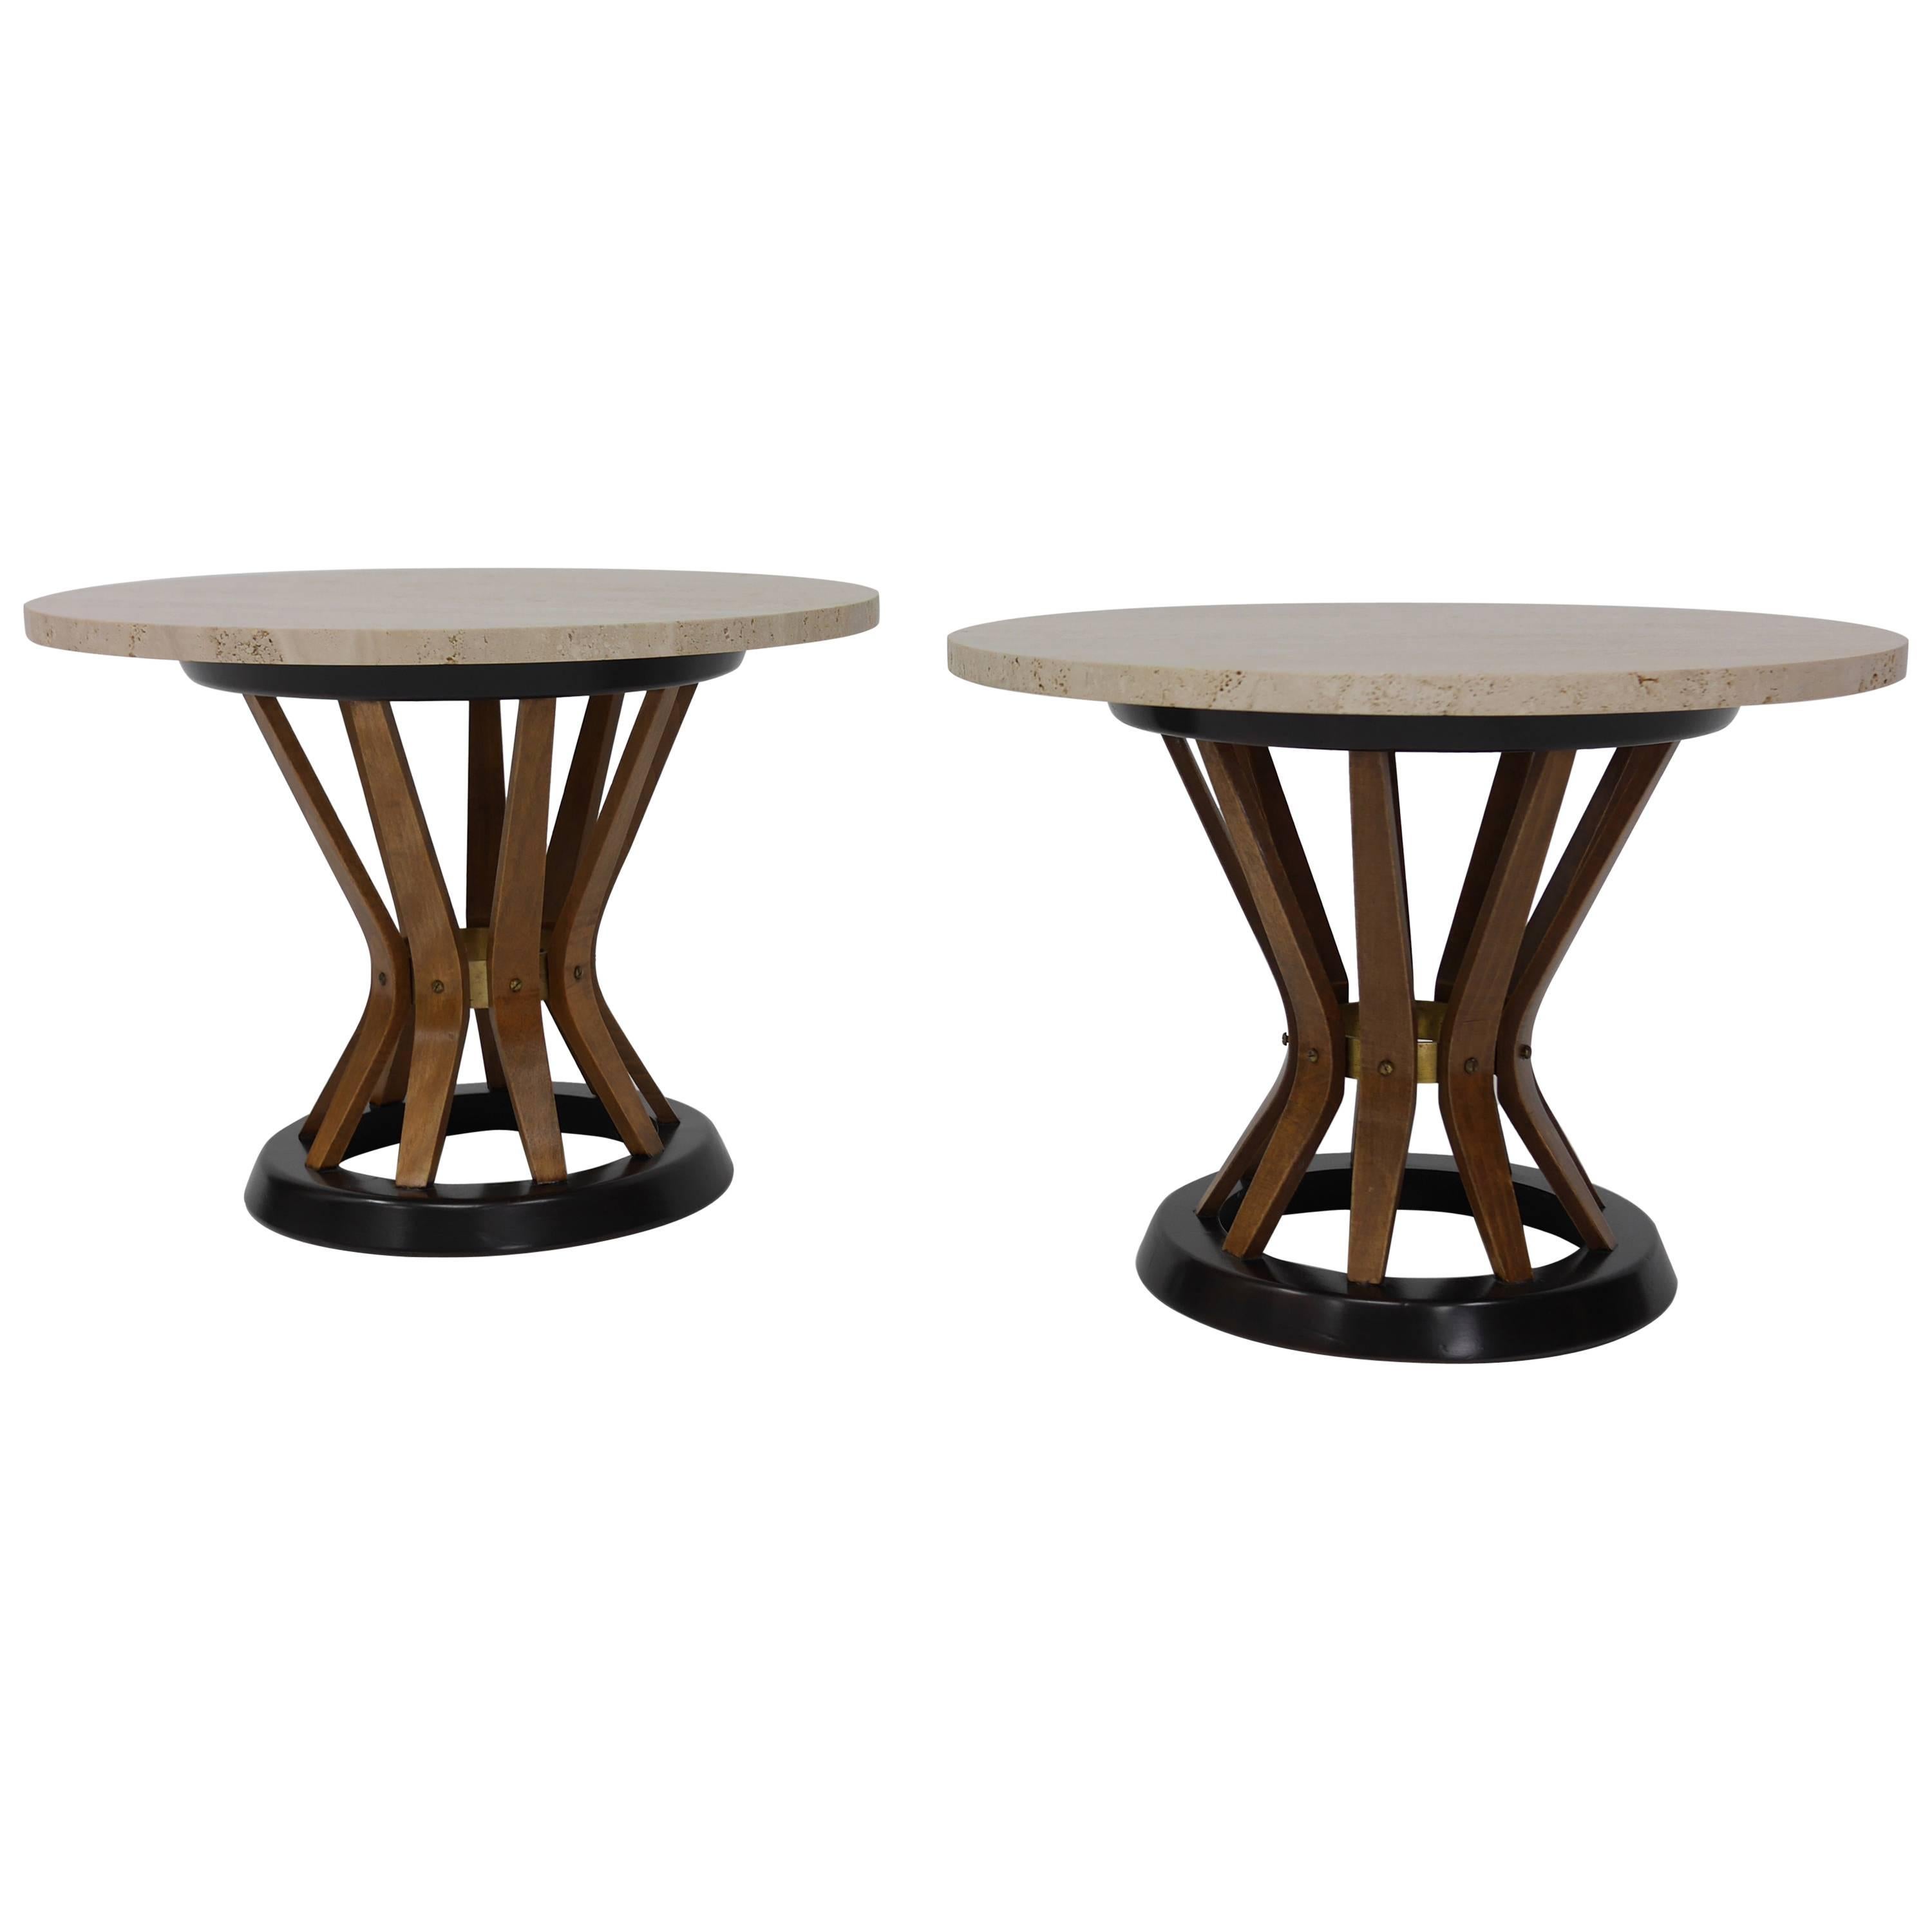 Pair of Sheaf of Wheat Side Tables by Edward Wormley for Dunbar For Sale